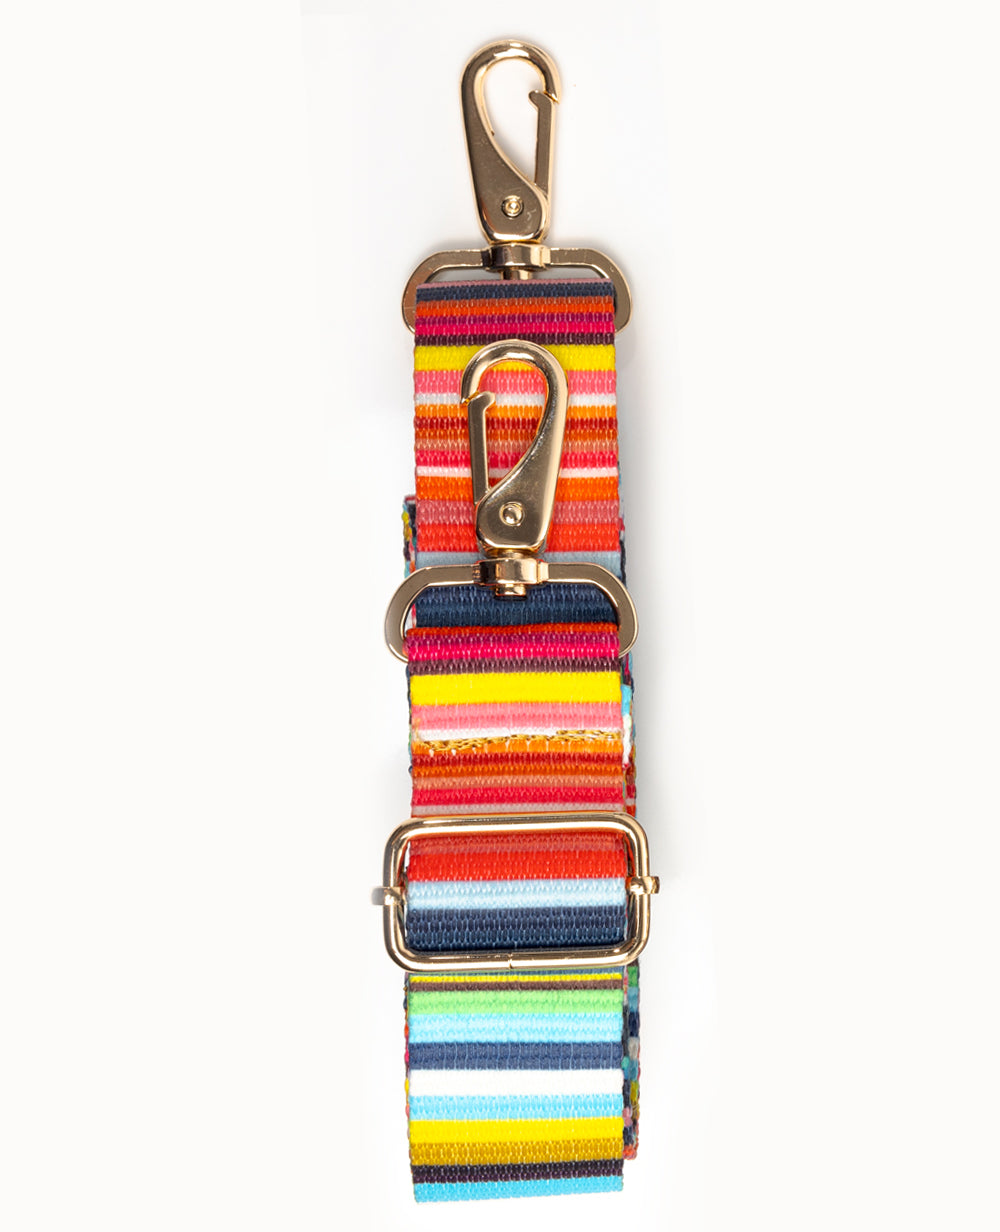 Colorful striped purse strap with gold hardware